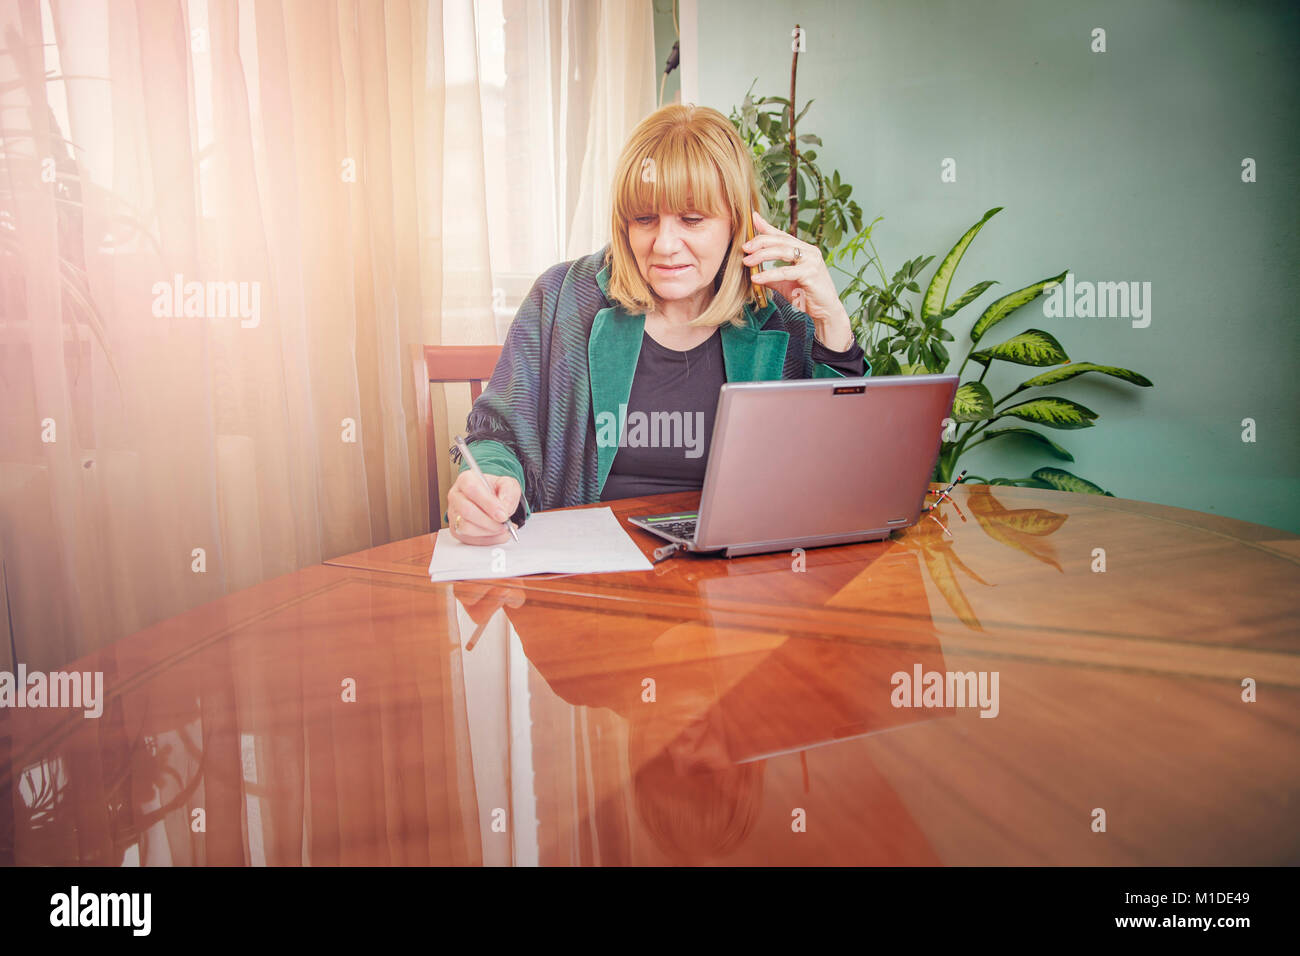 Elderly lady writing down orders, work from home Stock Photo